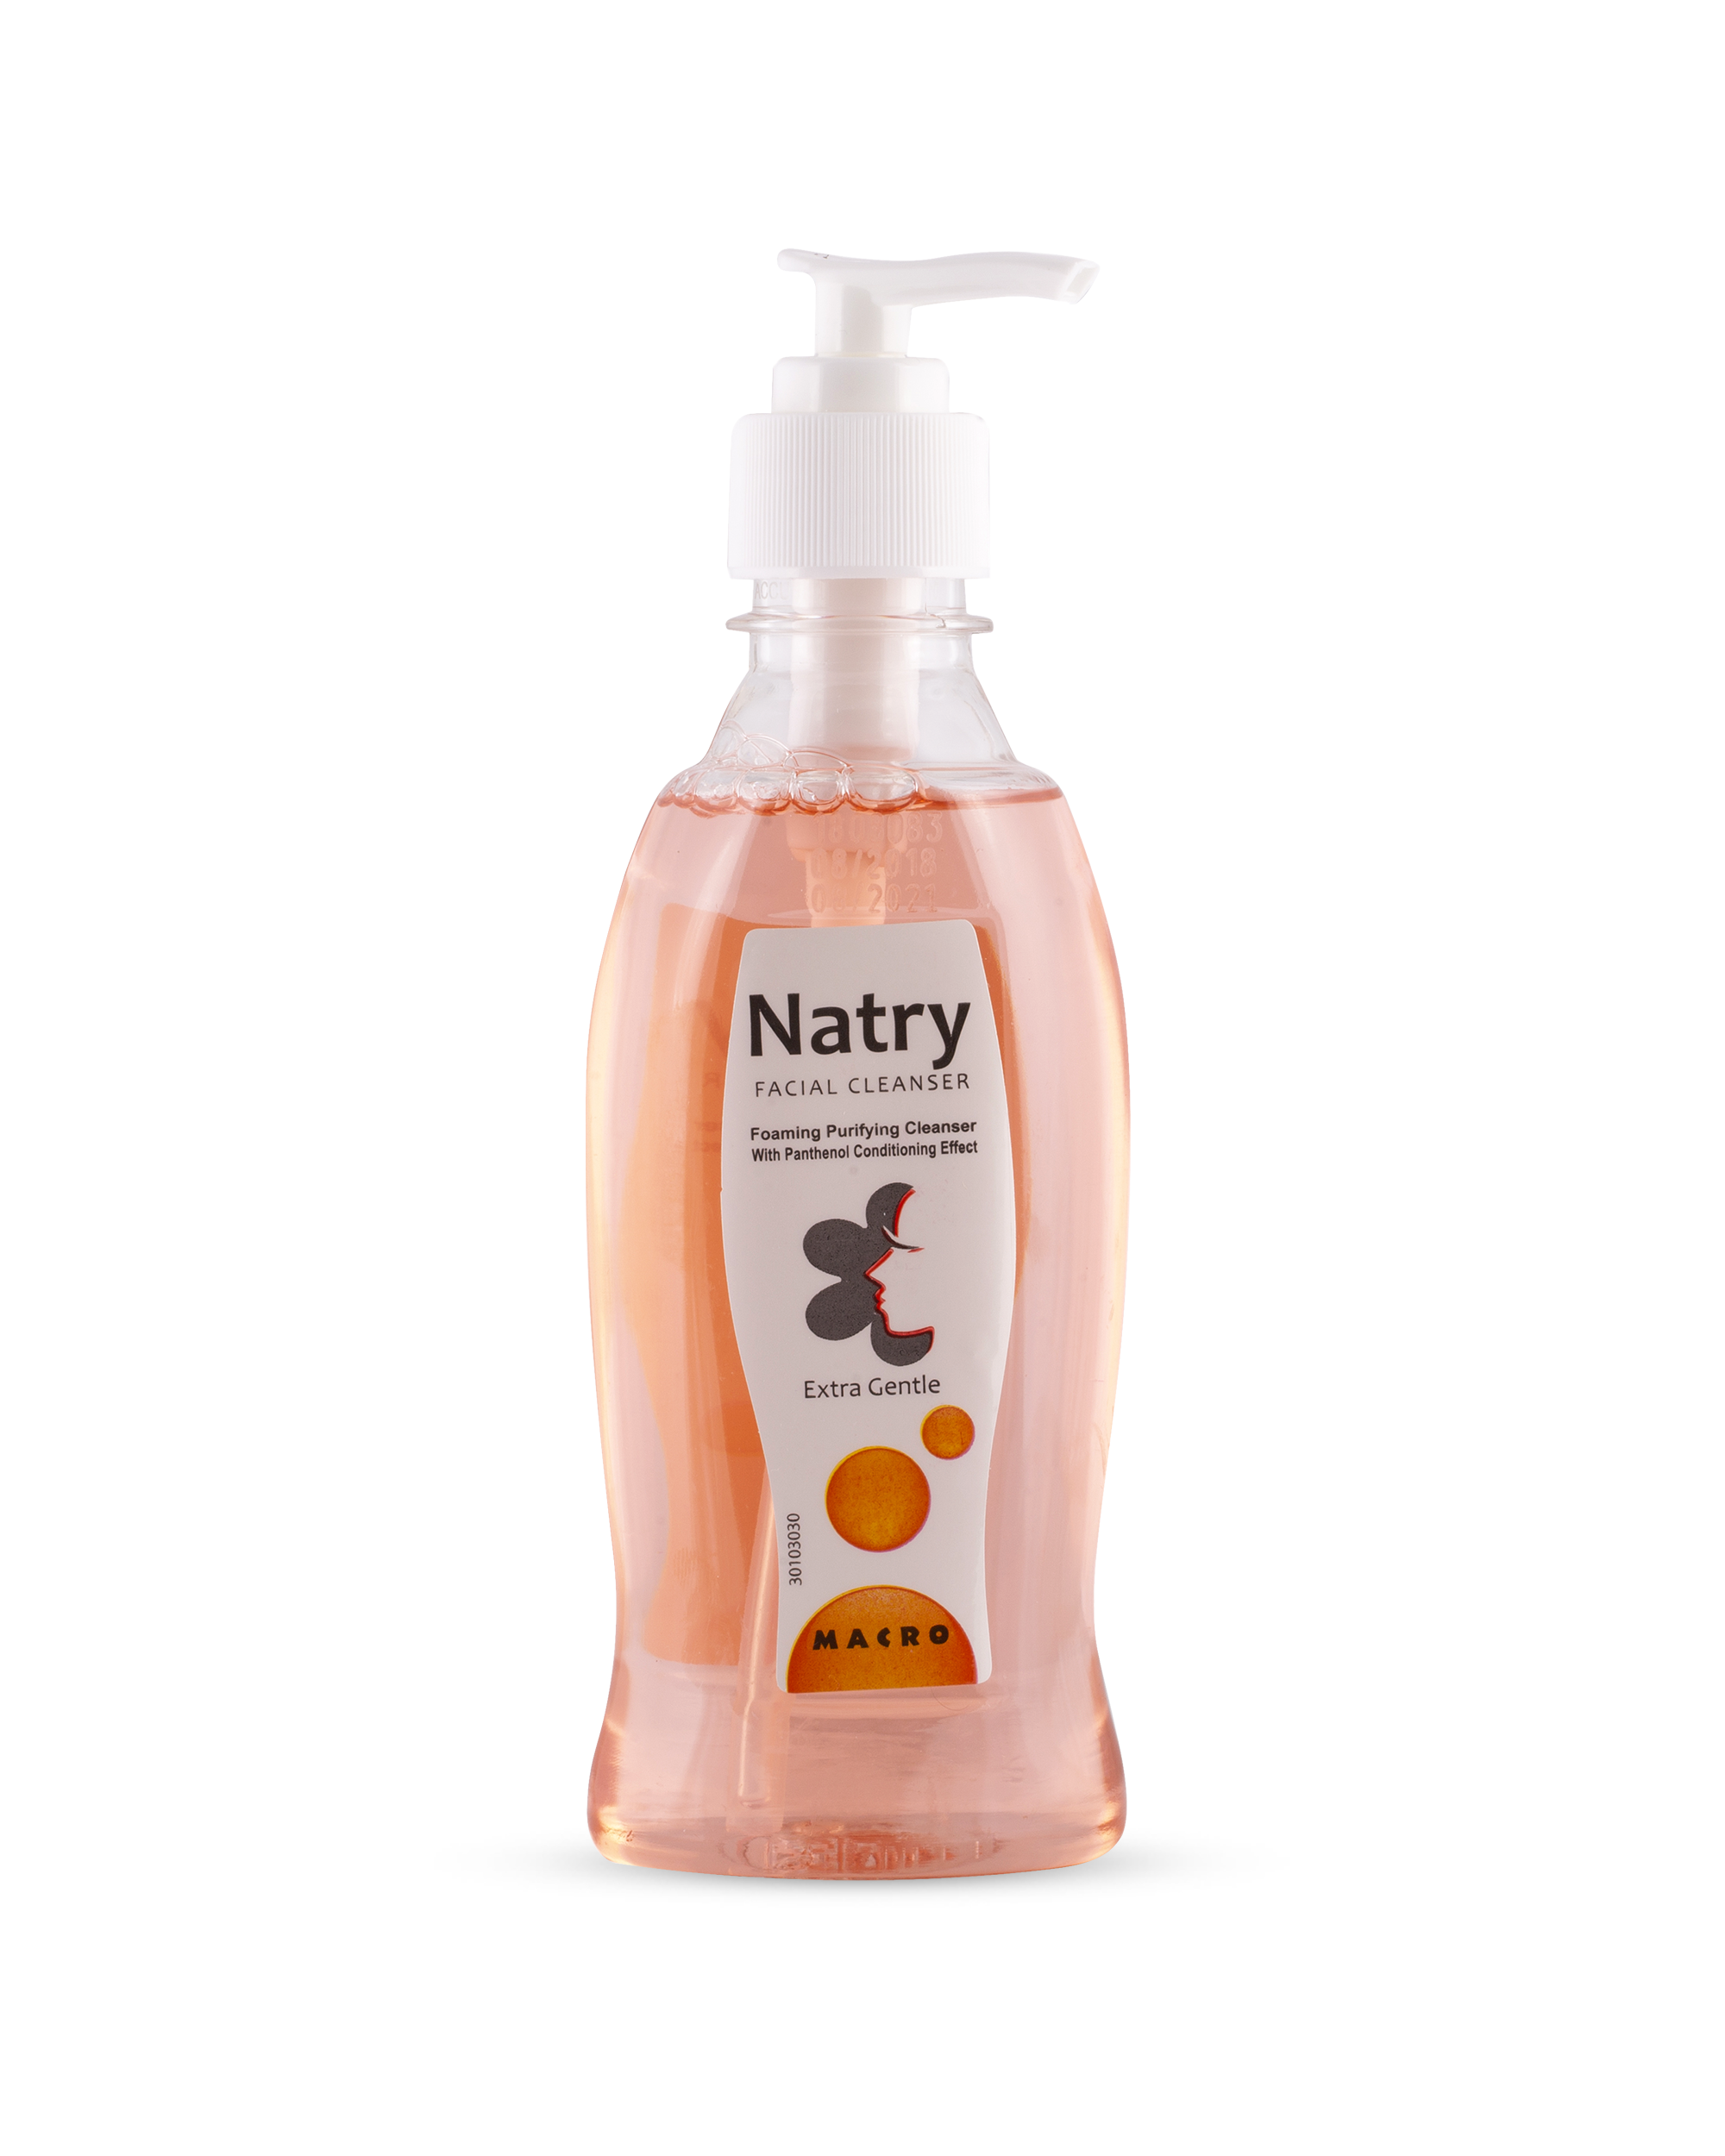 Natry Facial Cleanser